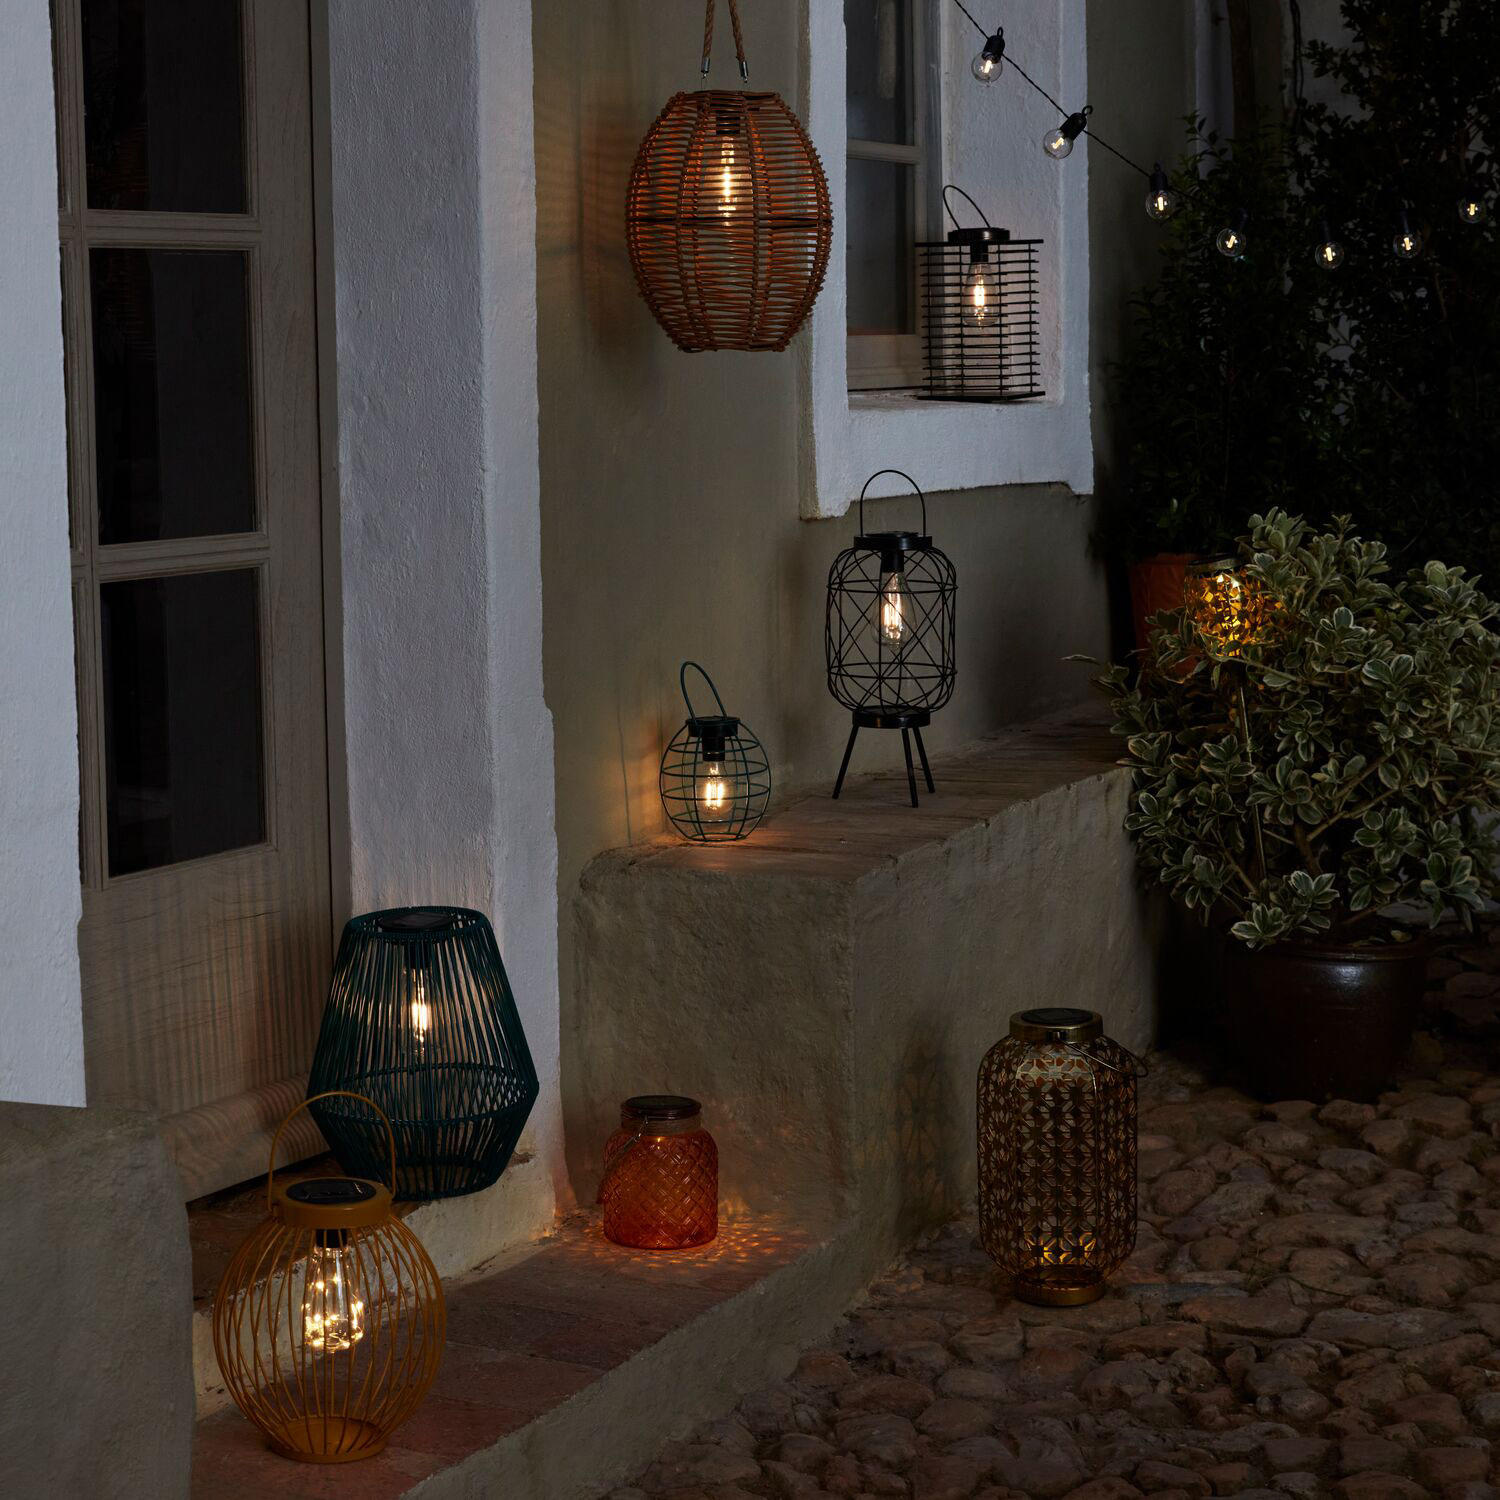 A selection of outdoor string lights and lanterns lit up at night